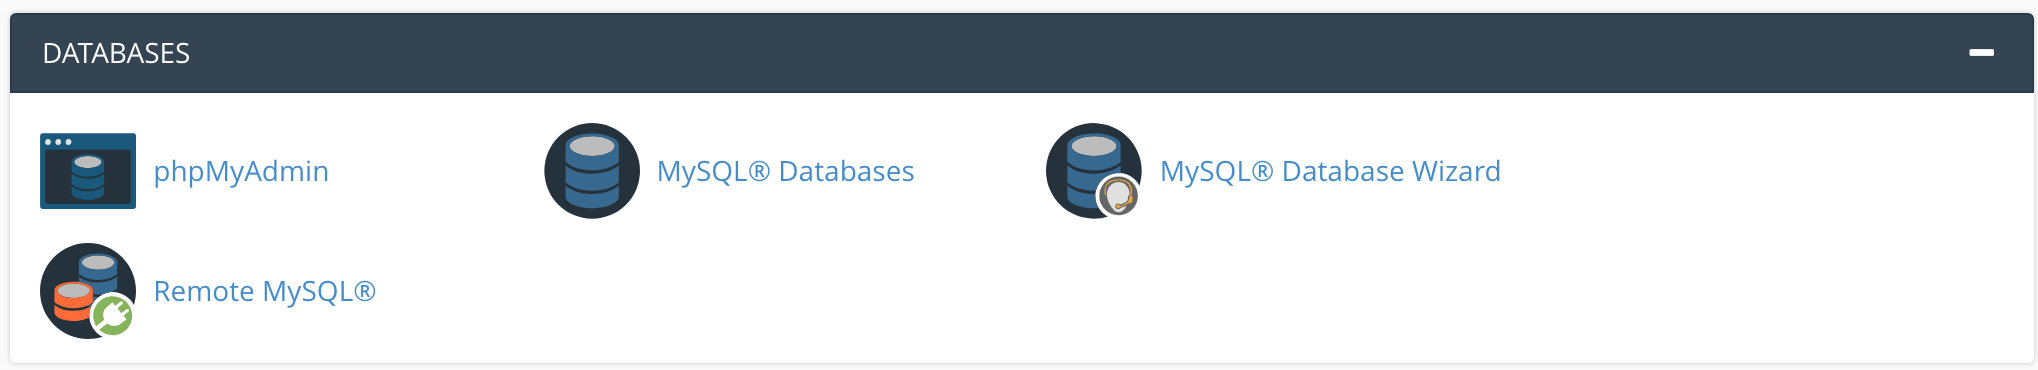 database cpanel feature